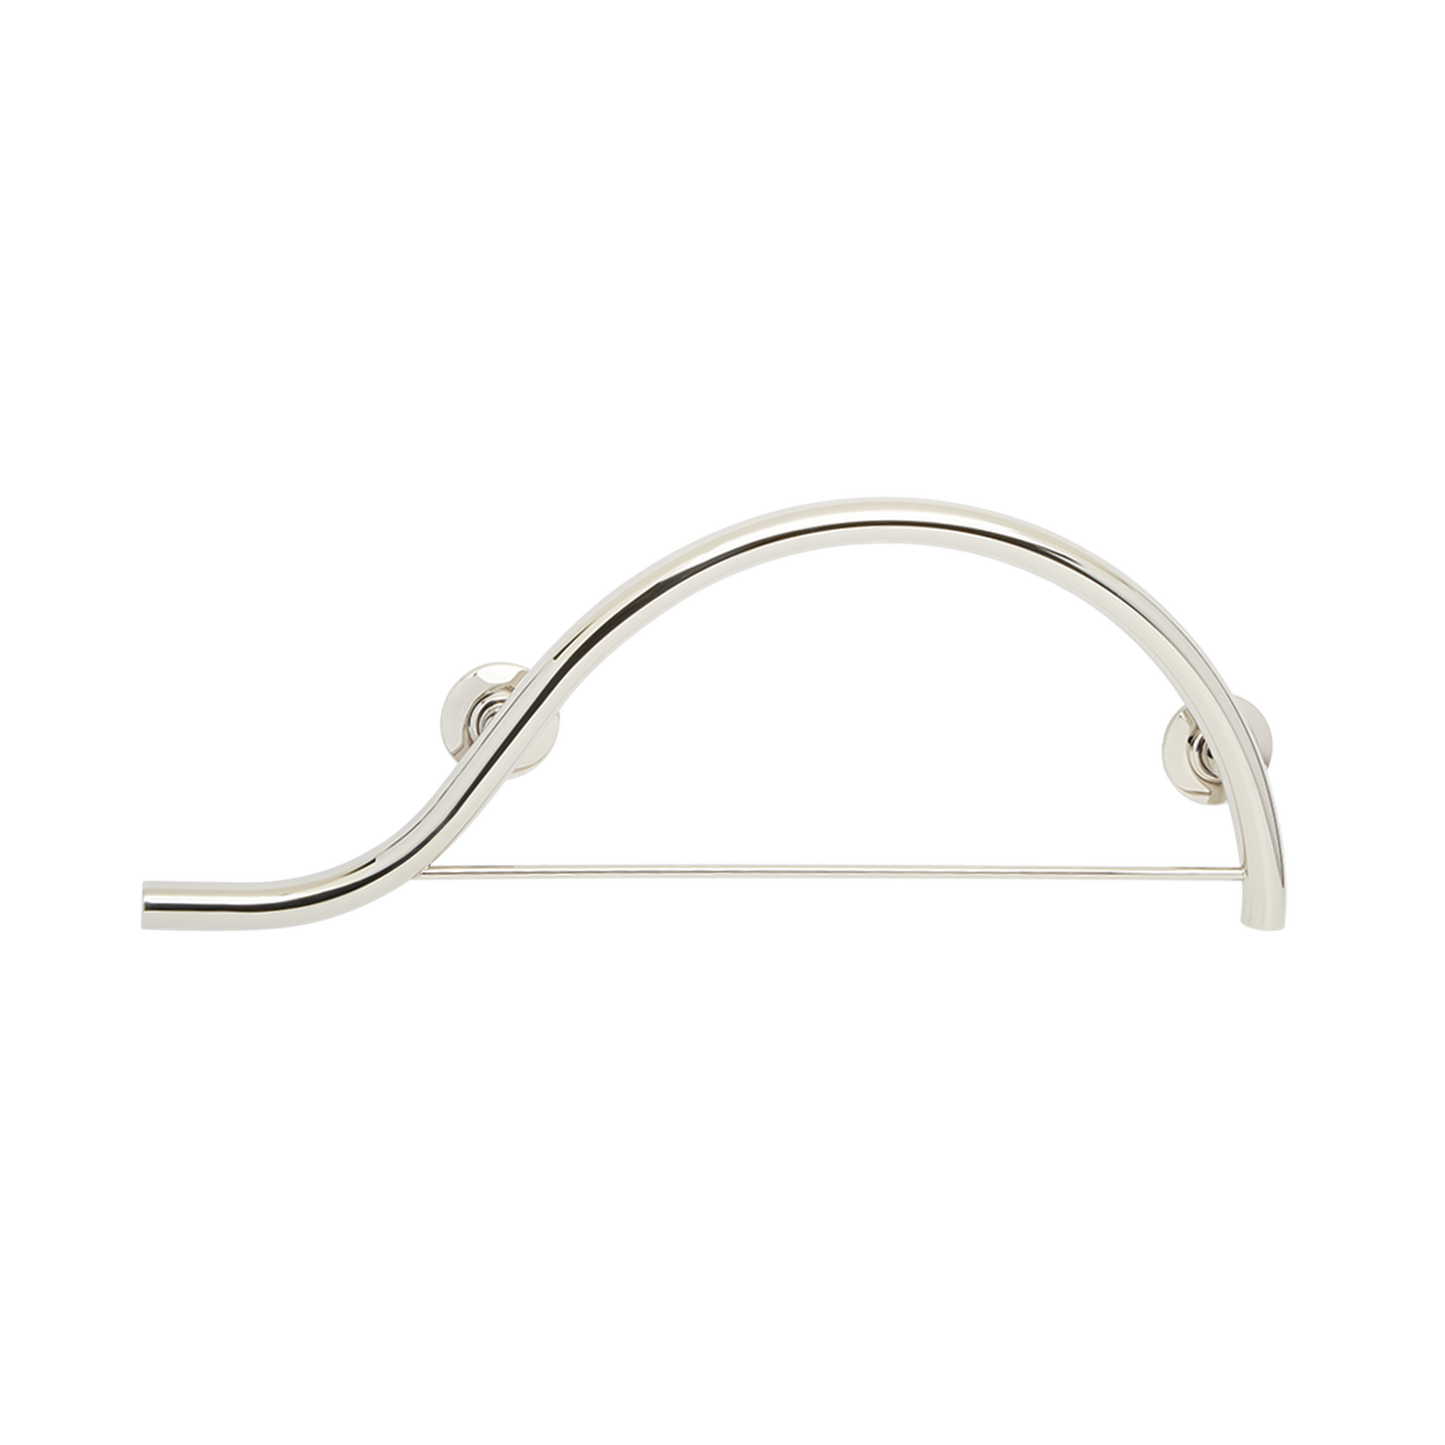 Seachrome Lifestyle & Wellness 30" Polished Stainless Steel 1.25 Diameter Concealed Flange Left-Handed Configuration Piano Curved Grab Bar With Towel Bar